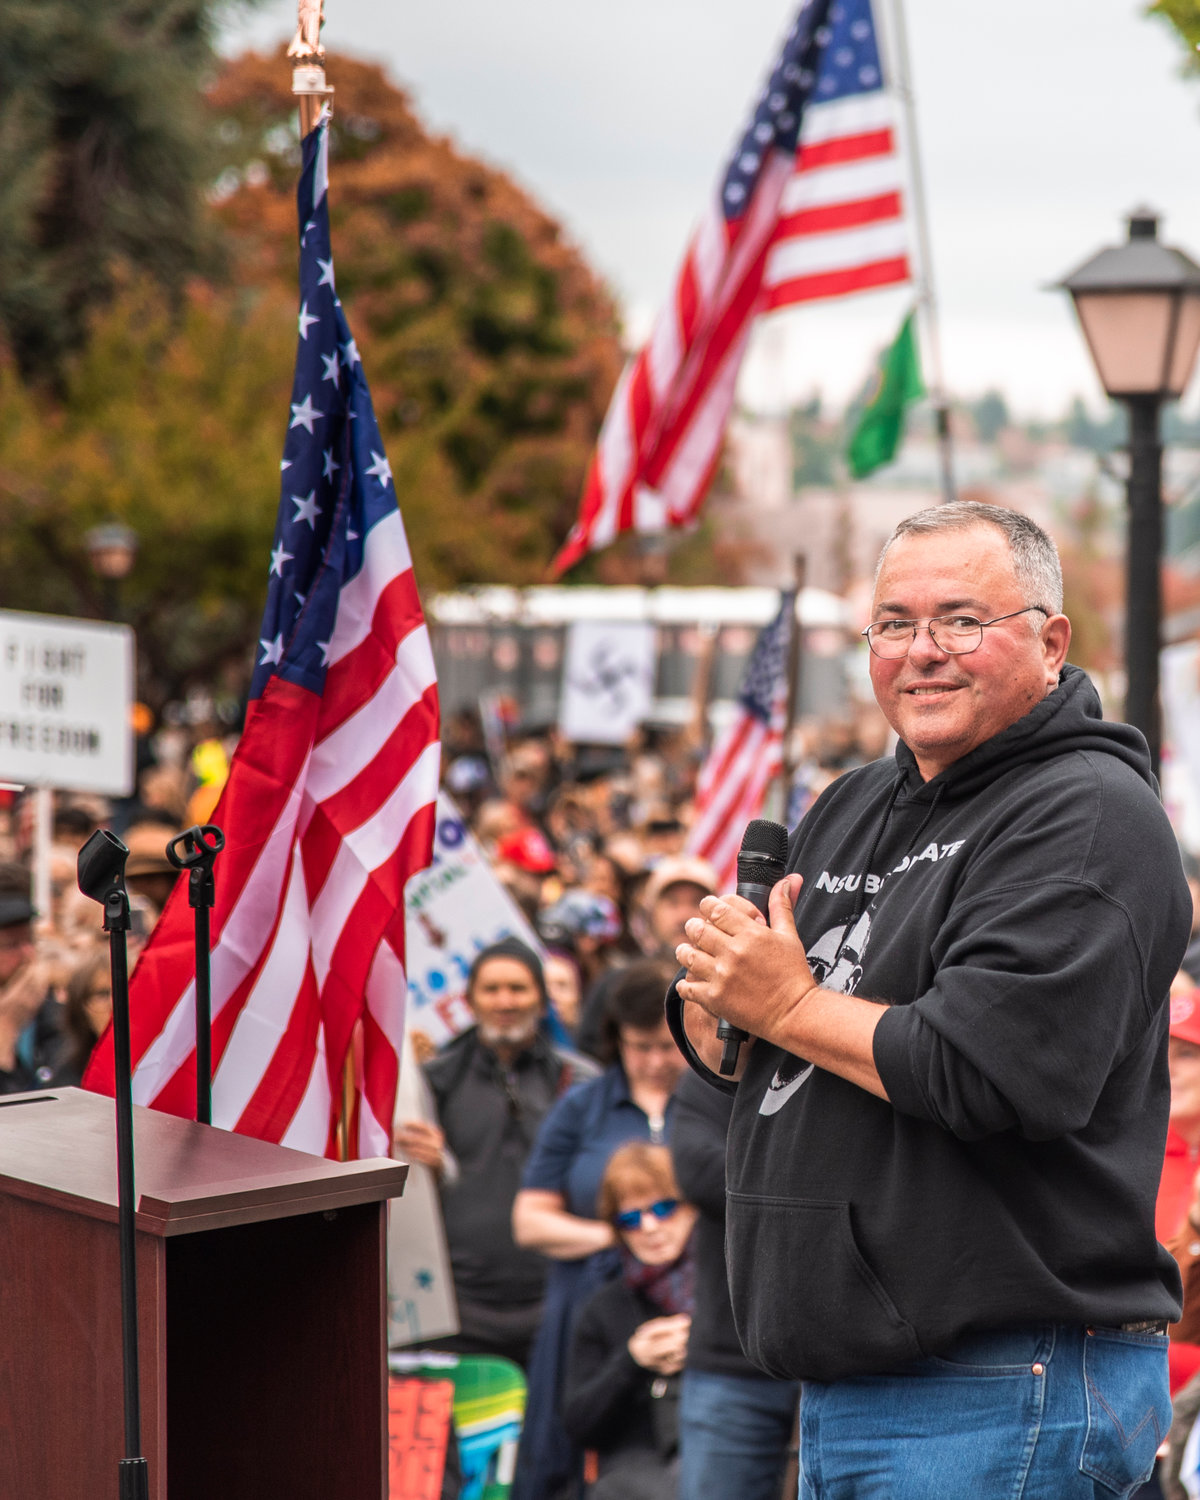 Loren Culp smiles while speaking to crowds during a “Medical Freedom Rally” in Olympia outside the Washington State Capitol Building Sunday afternoon.